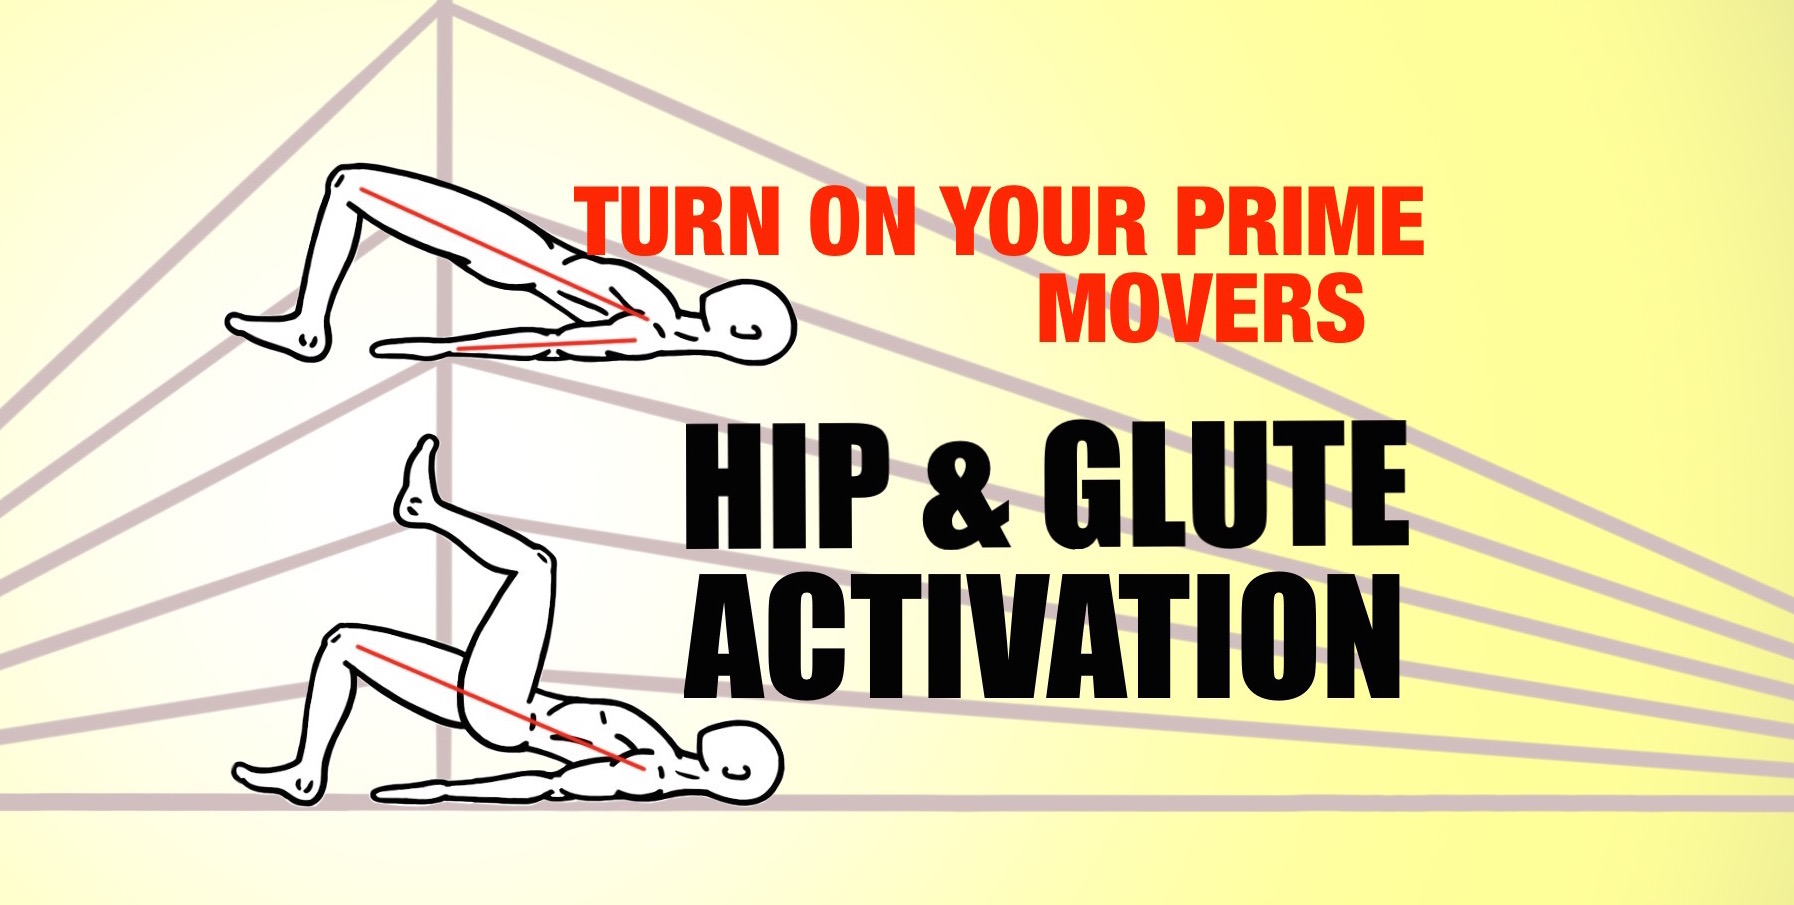 Hip and Glute Activation – Turn On your Prime Movers